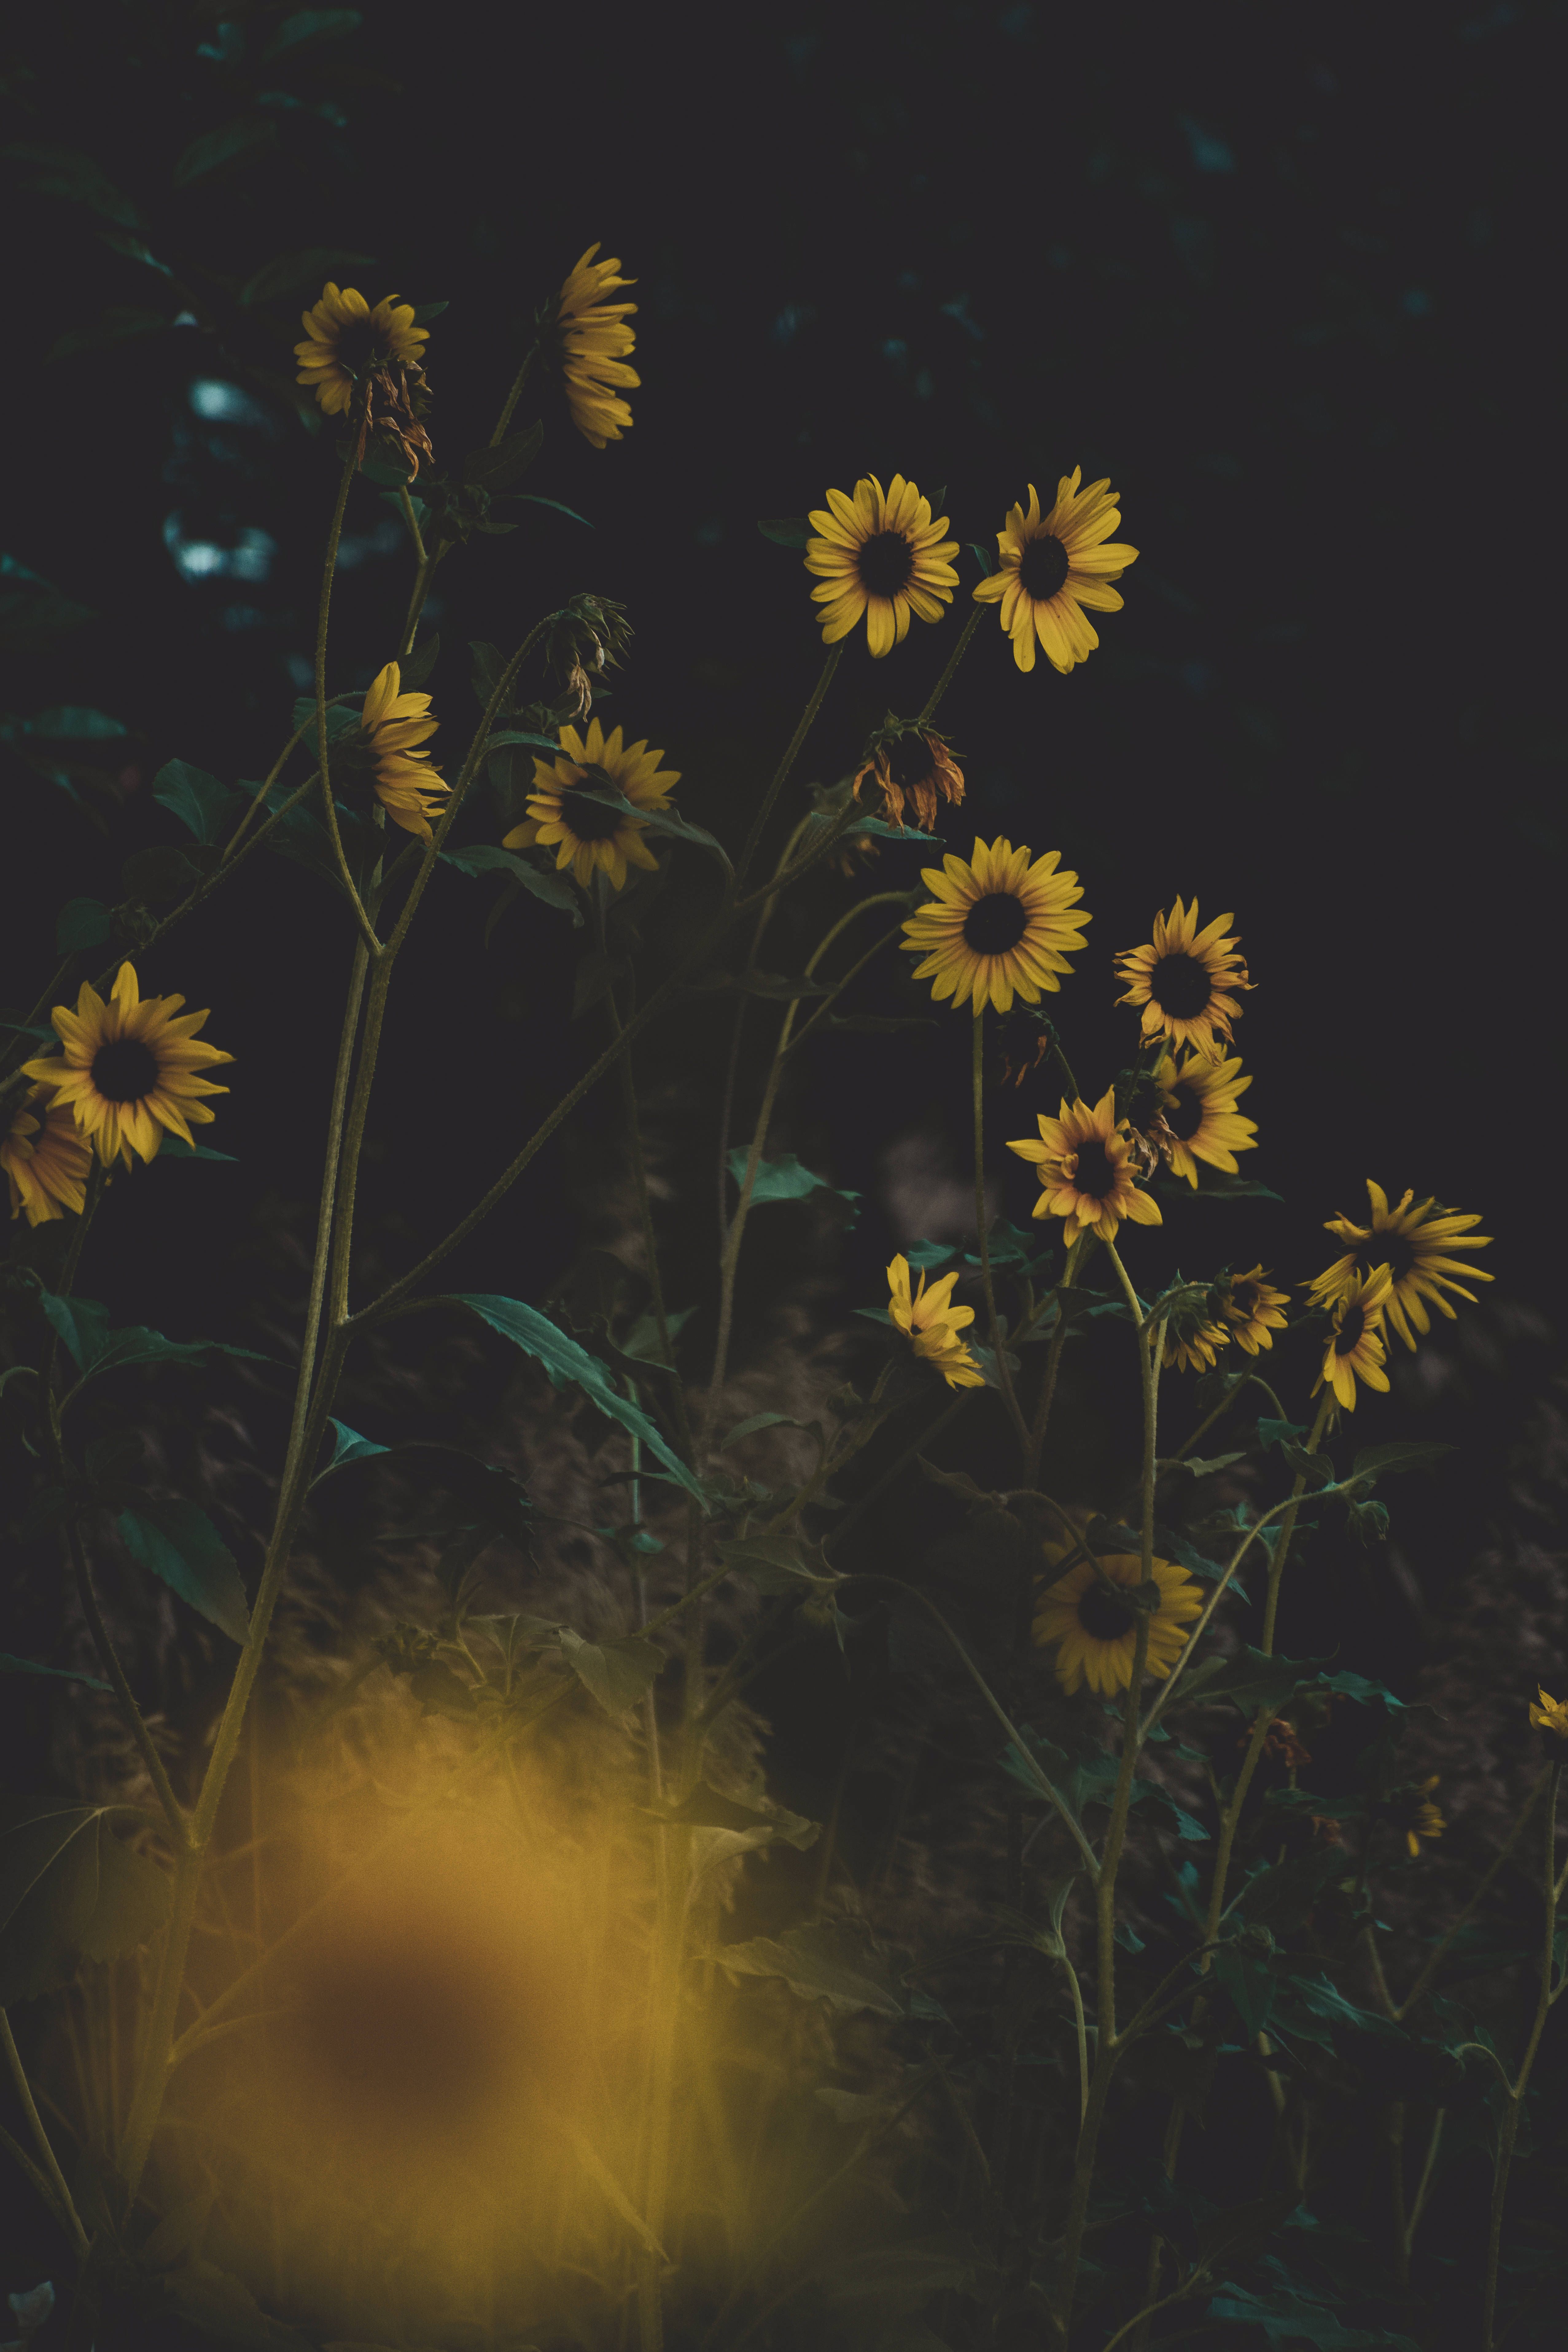 A group of yellow flowers in a dark background - Garden